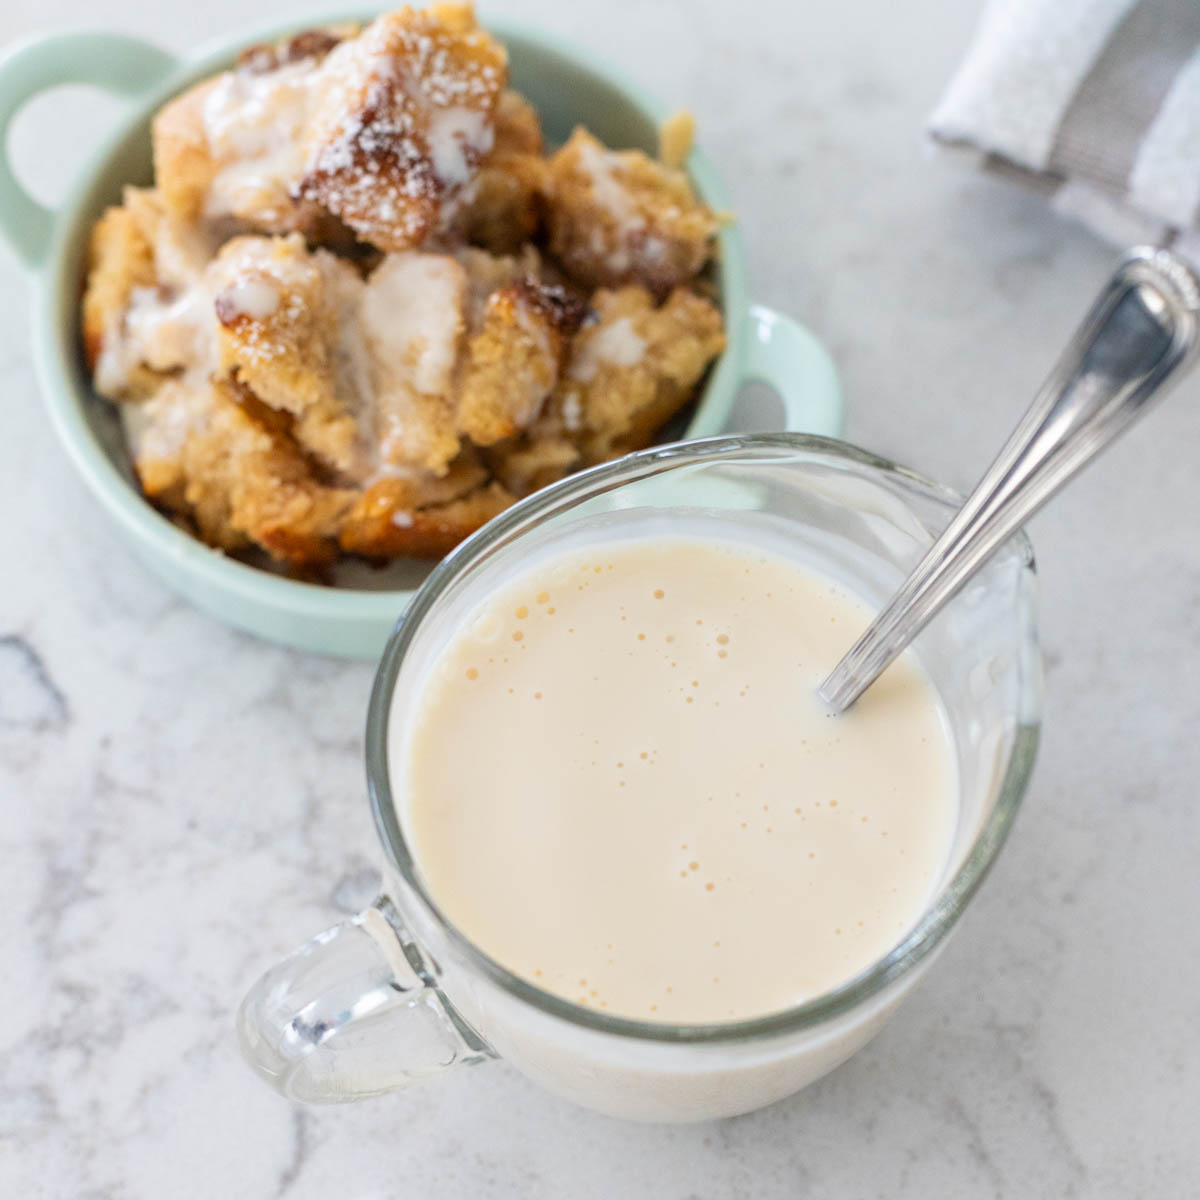 The pitcher of bourbon sauce sits next to a small dish of bread pudding.